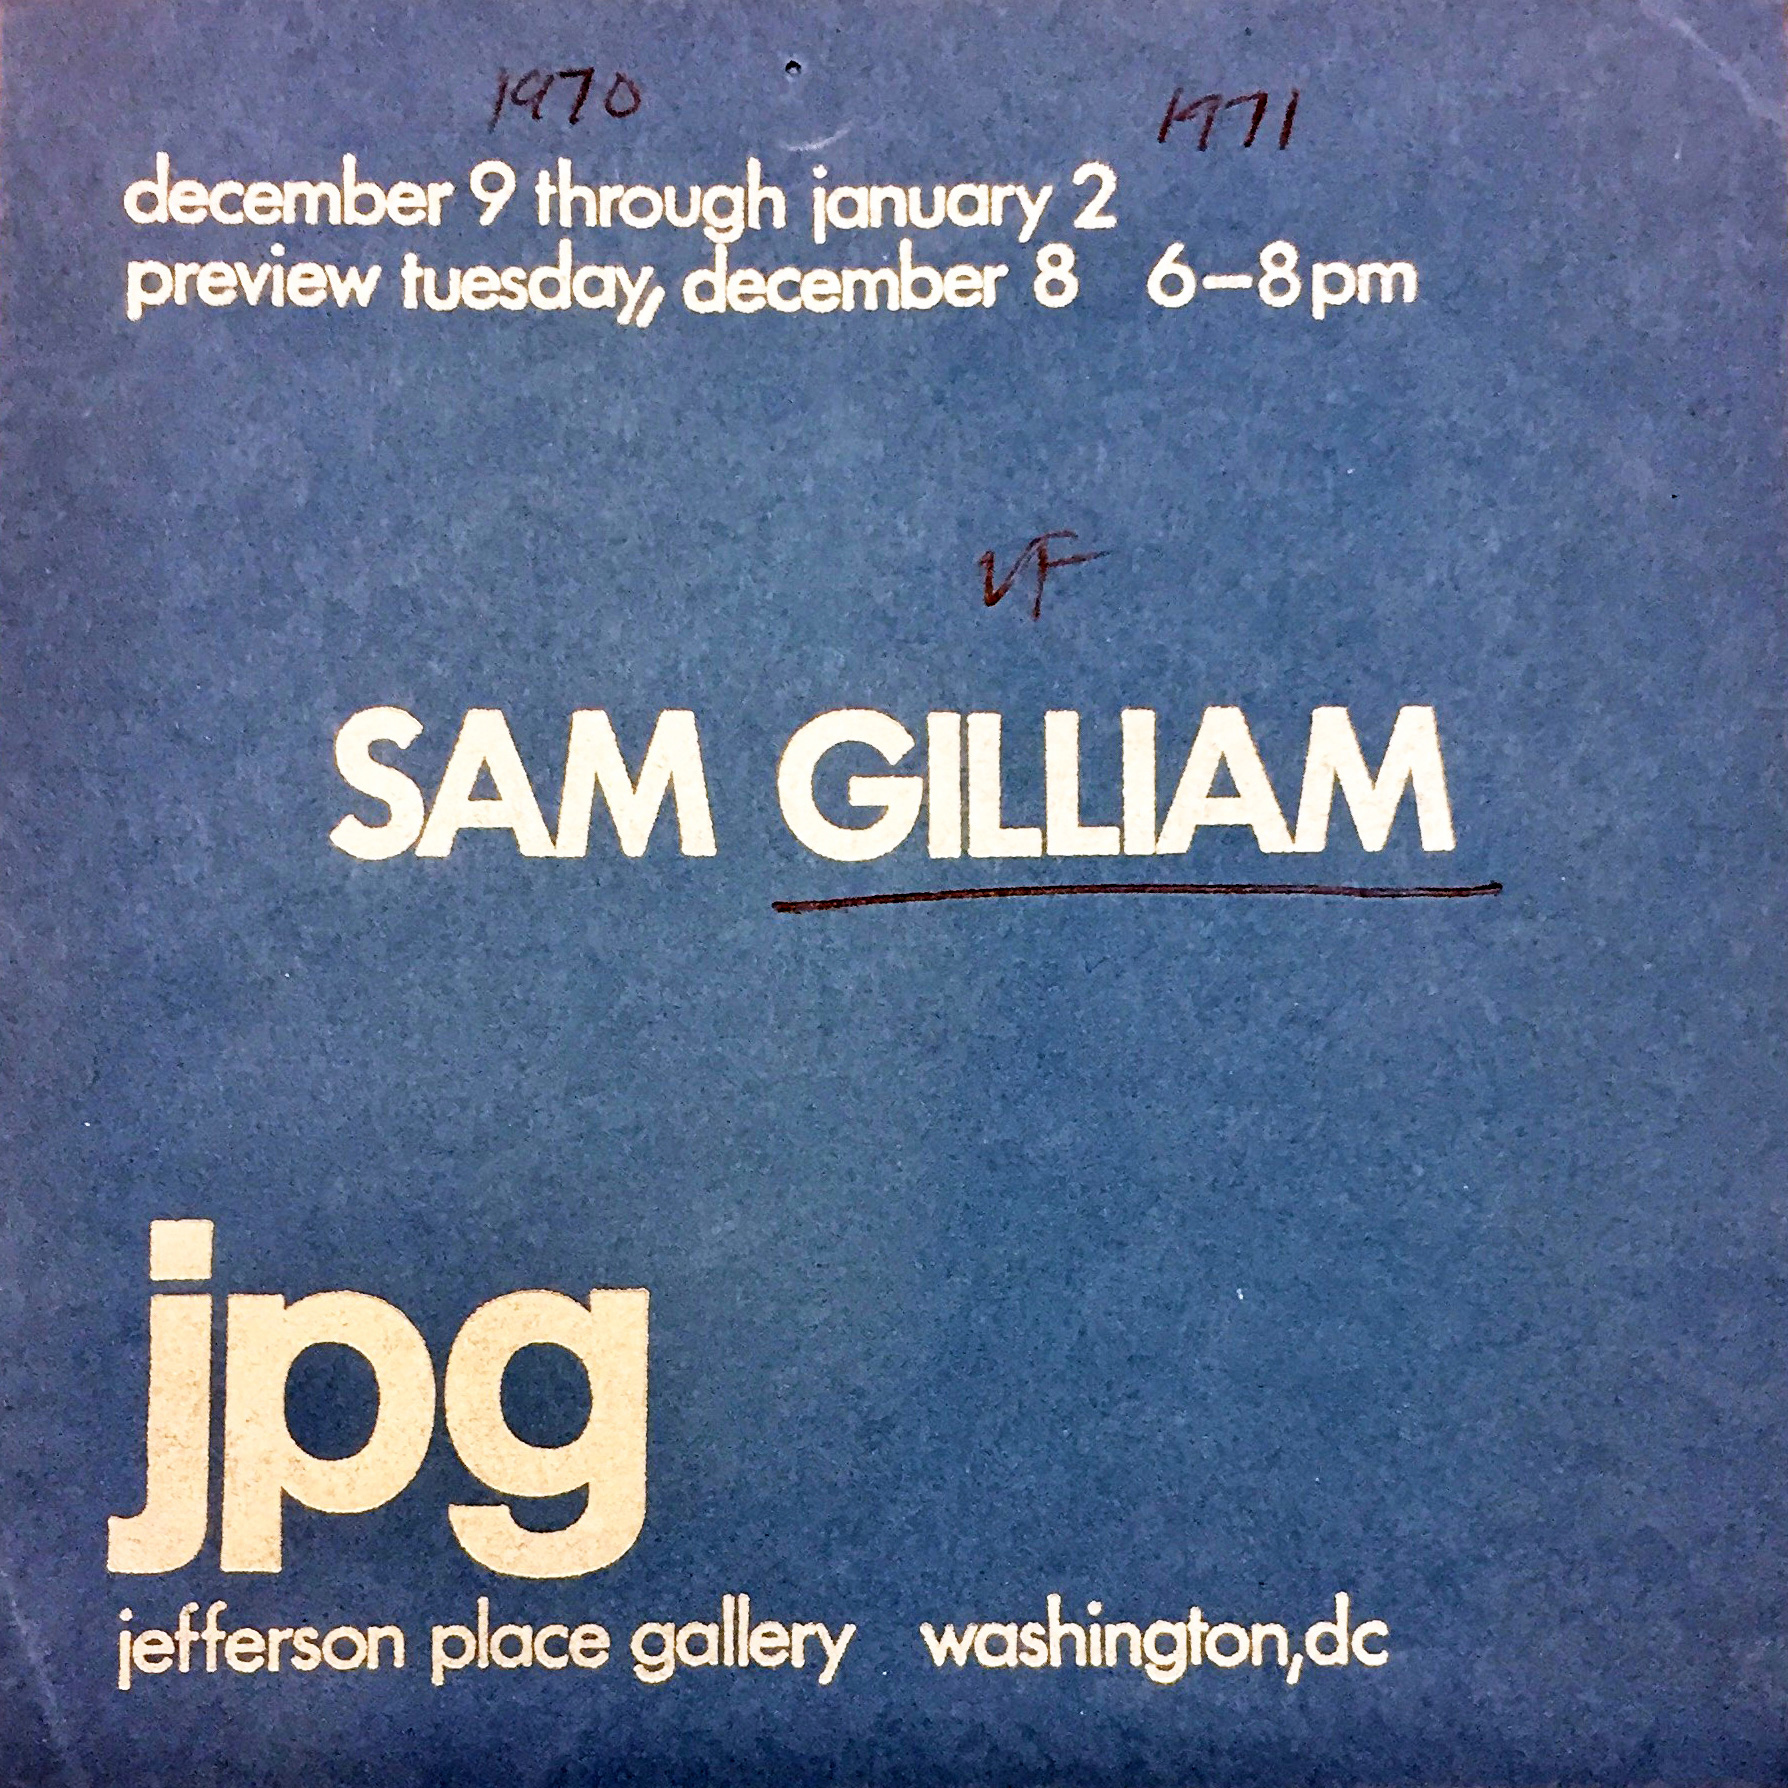 Announcement card for Sam Gilliam, 1970, at Jefferson Place Gallery